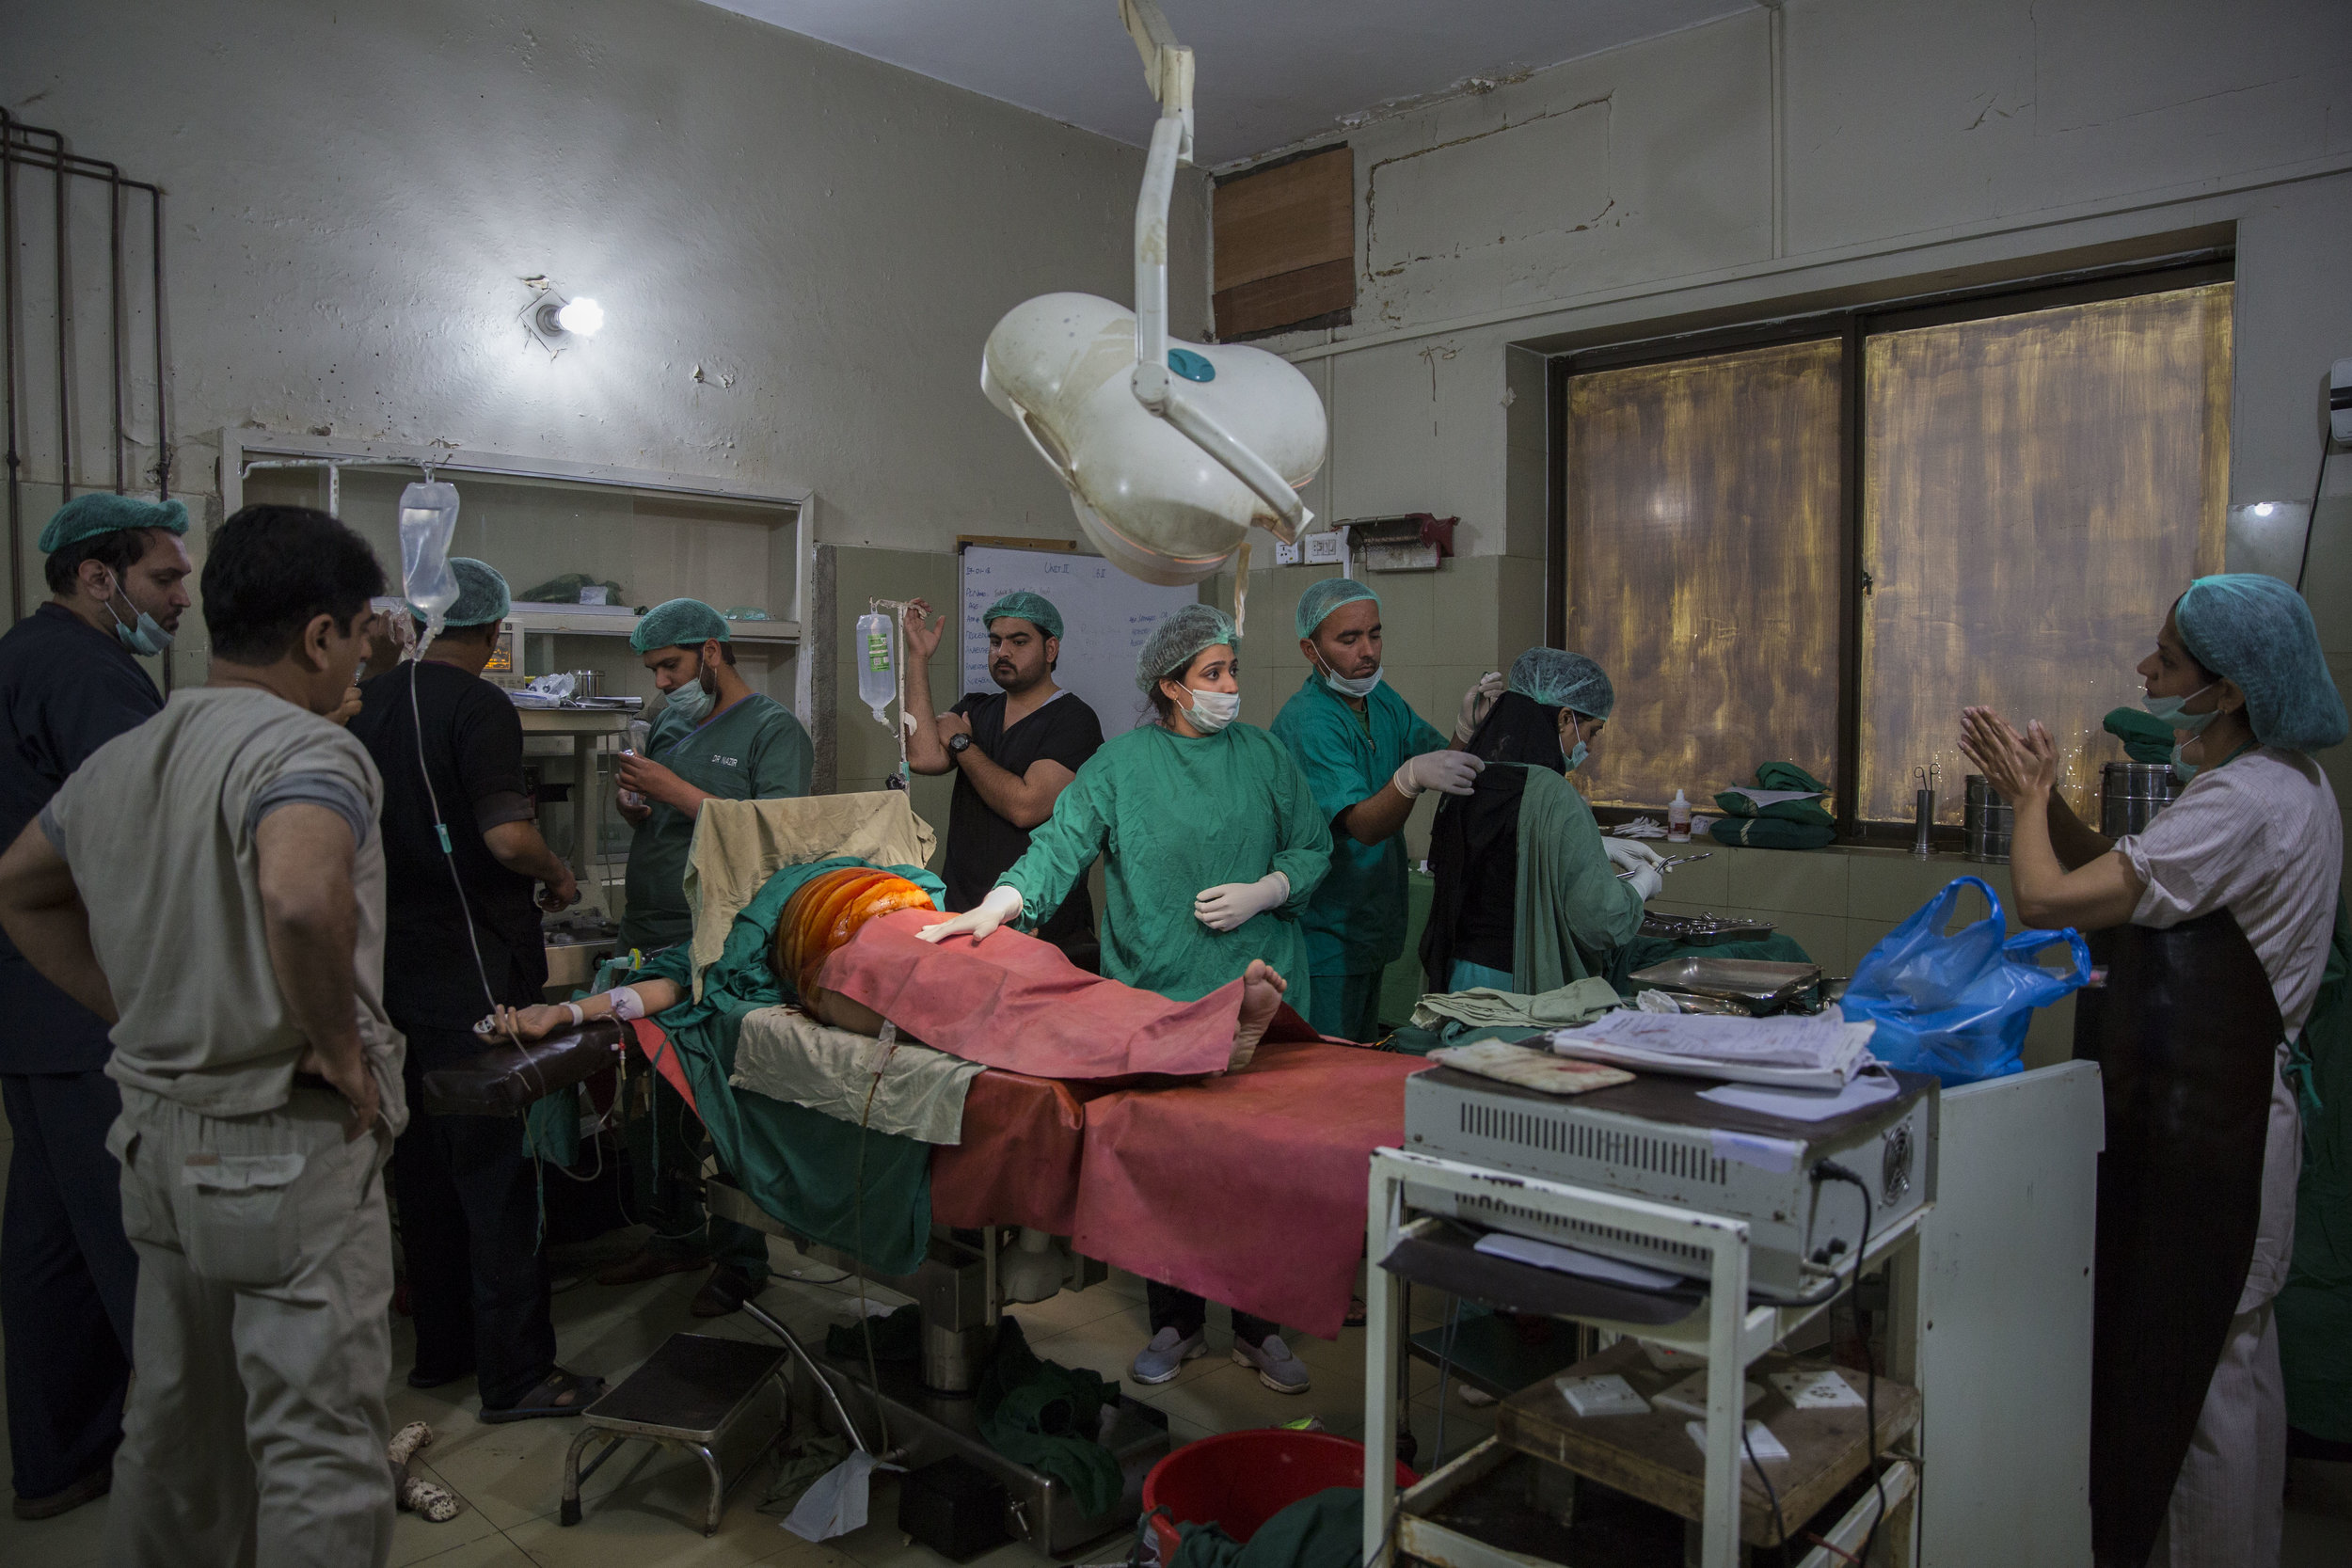  Dr. Sadia Khan along with her team of doctors and technicians prepare Nosheela for a C-section, who is a suspected case of postpartum haemorrhaging. 